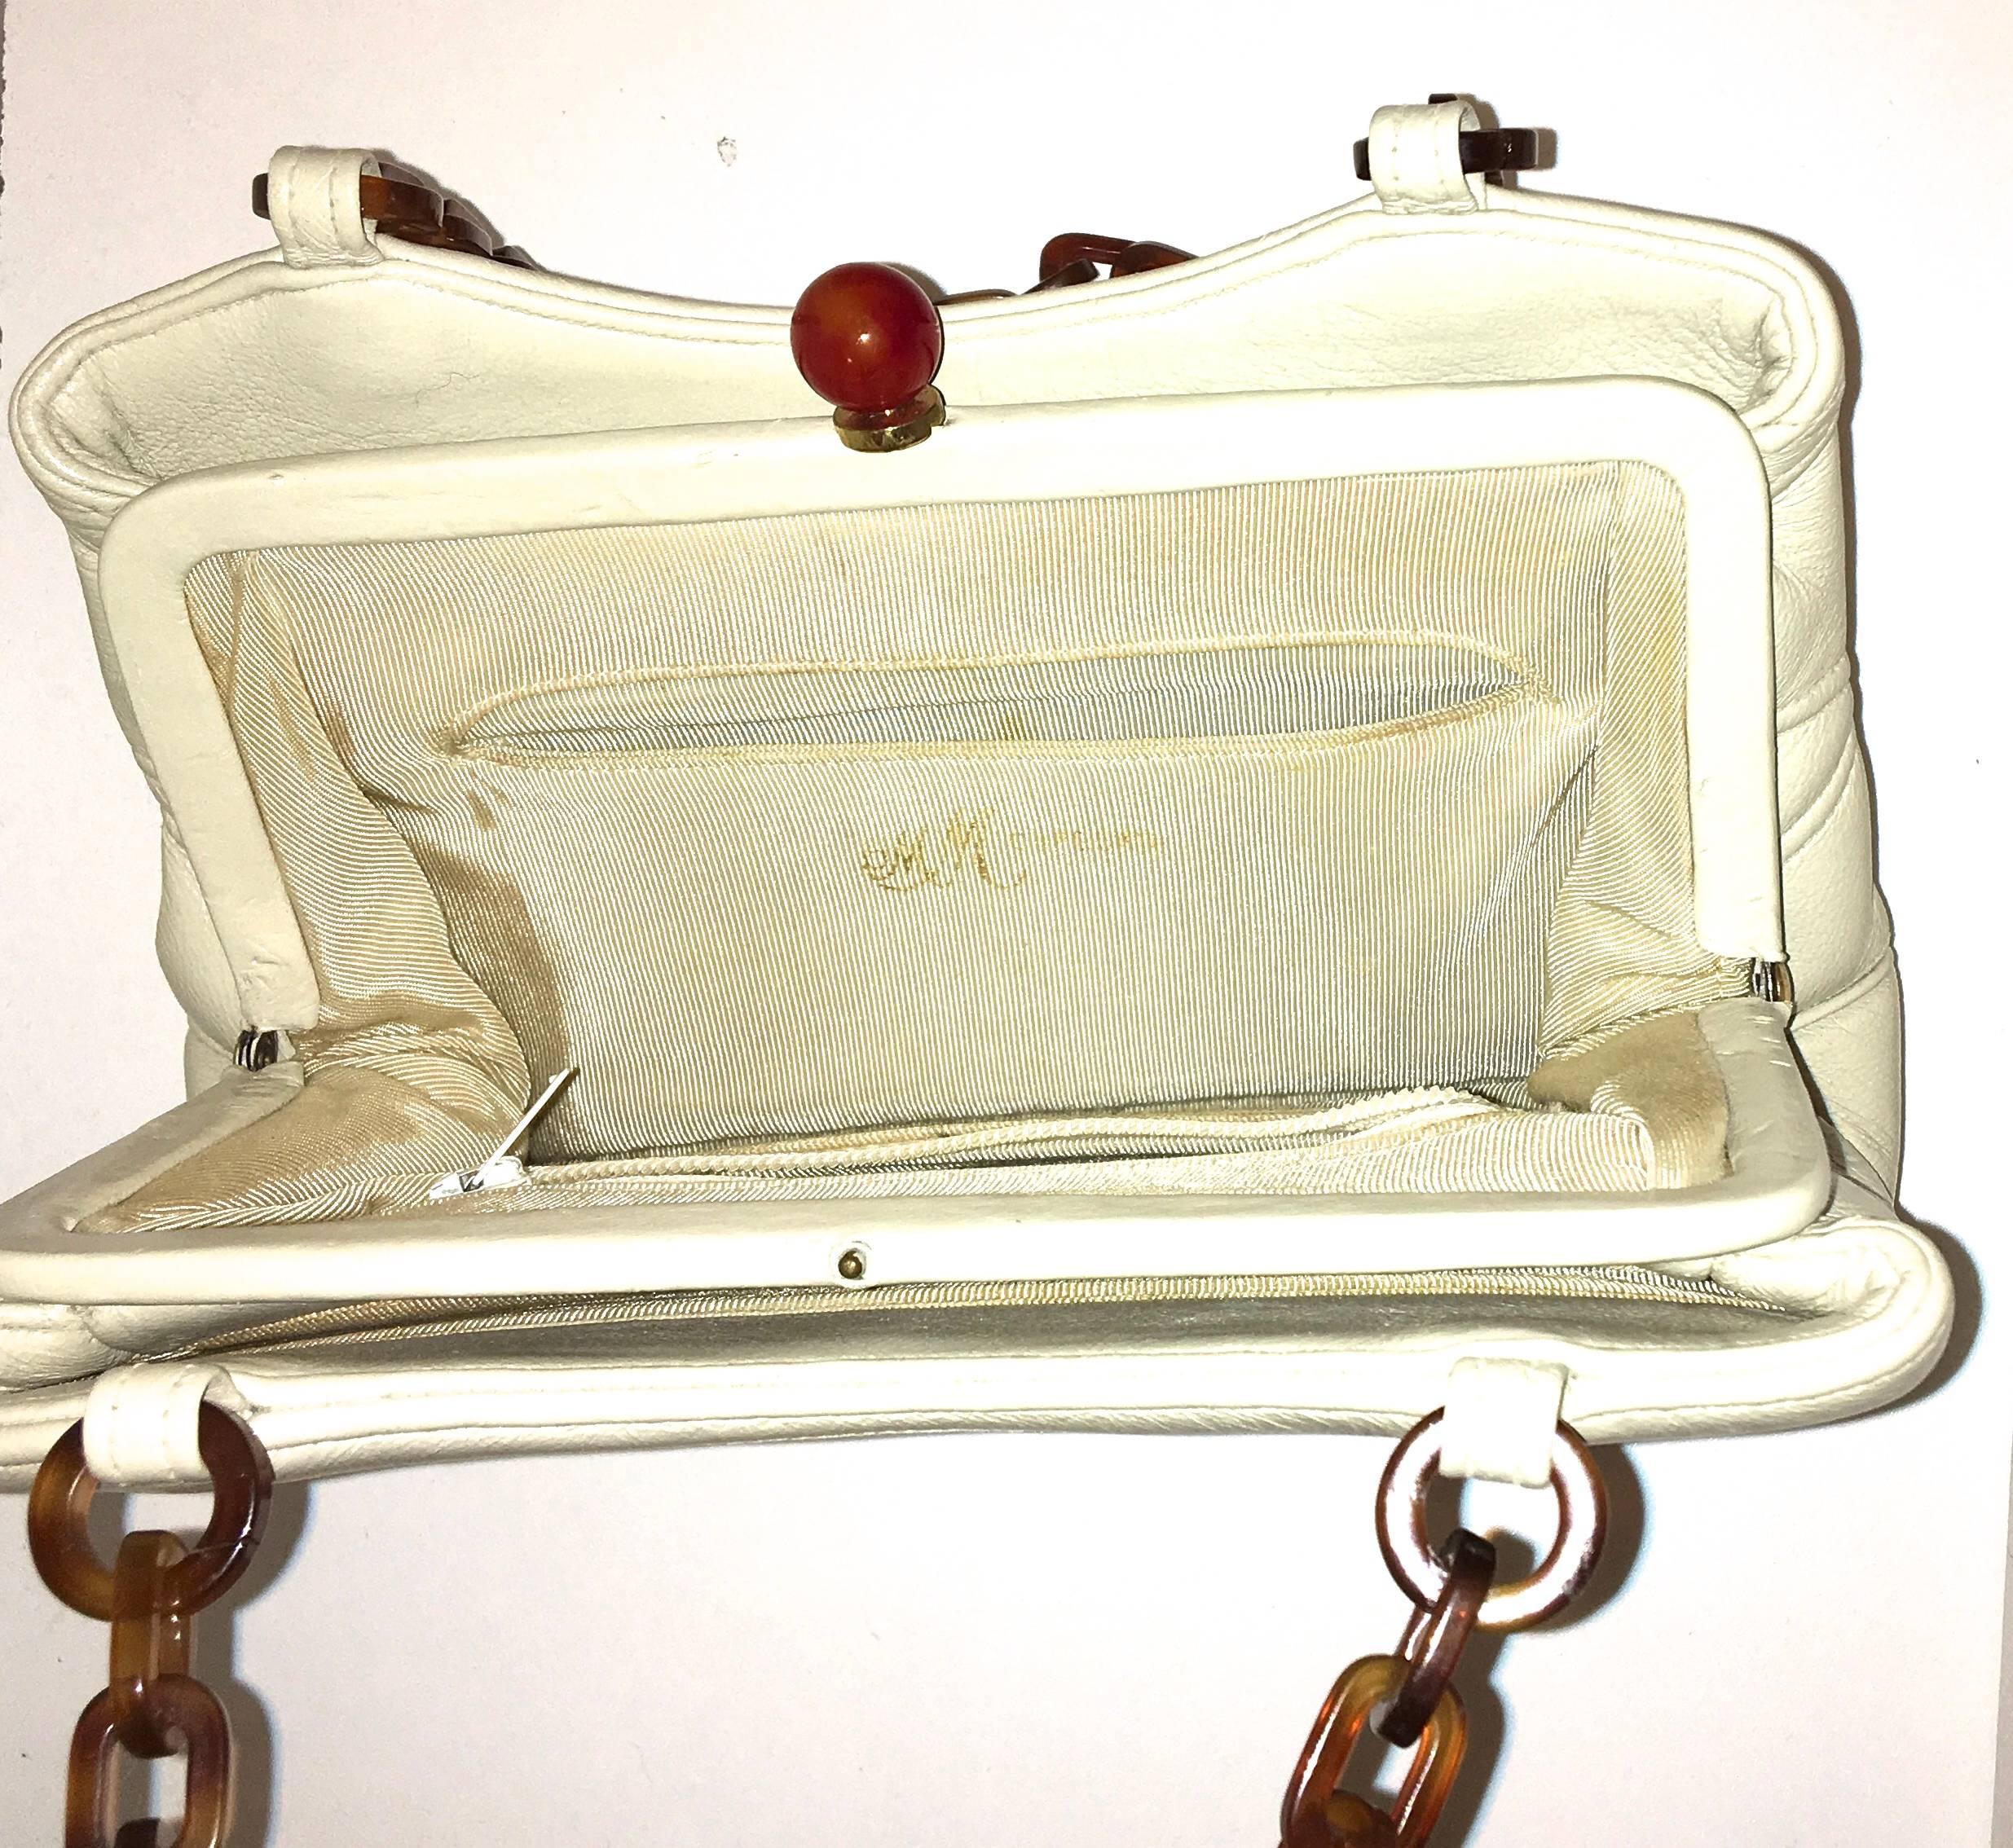 Rare 1950's Morris Moscowitz Beige Leather Purse - Bakelite Hardware For Sale 1